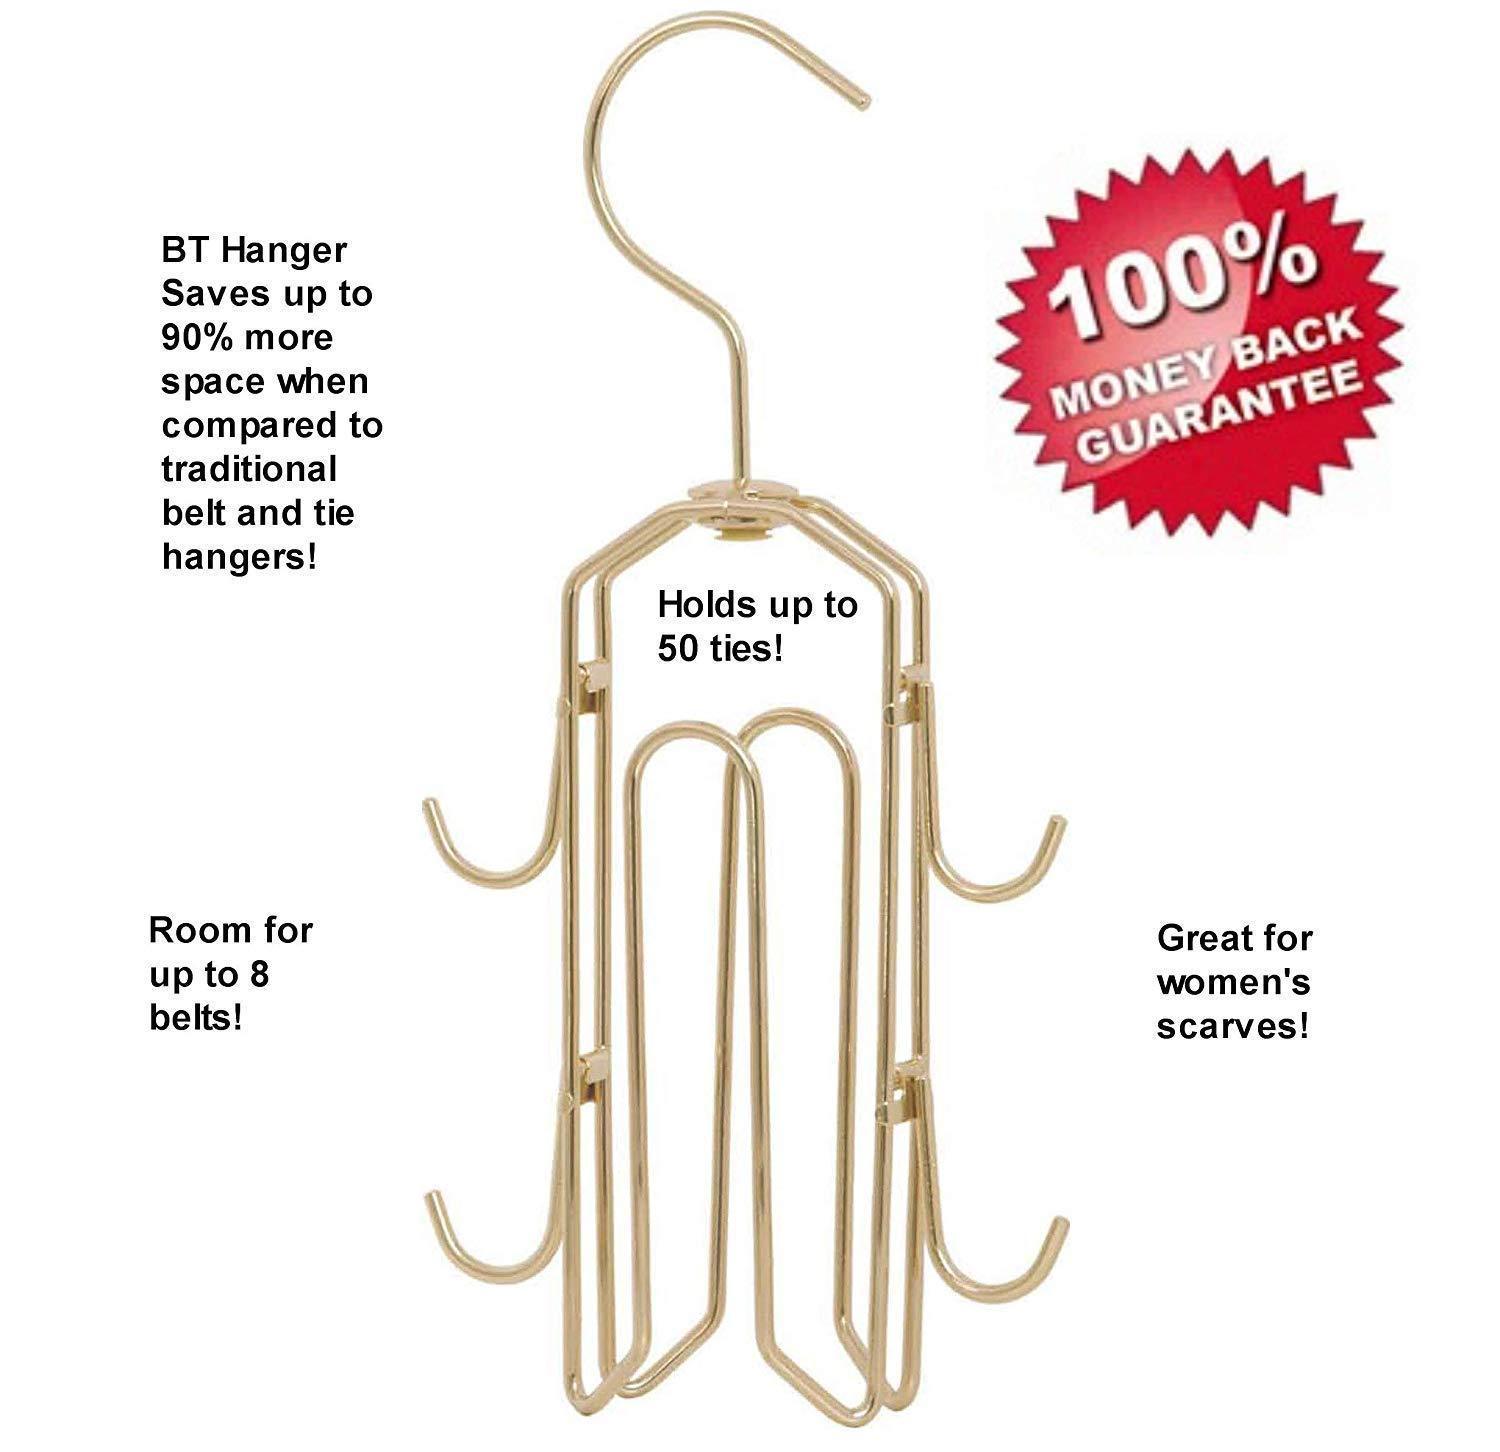 Buy now bt hanger tie rack tie holder tie hanger belt hook hangers in a closet organizer with non wood racks hold ties bow tie for men and mens belts and hanging accessories by rotating swiveling hooks